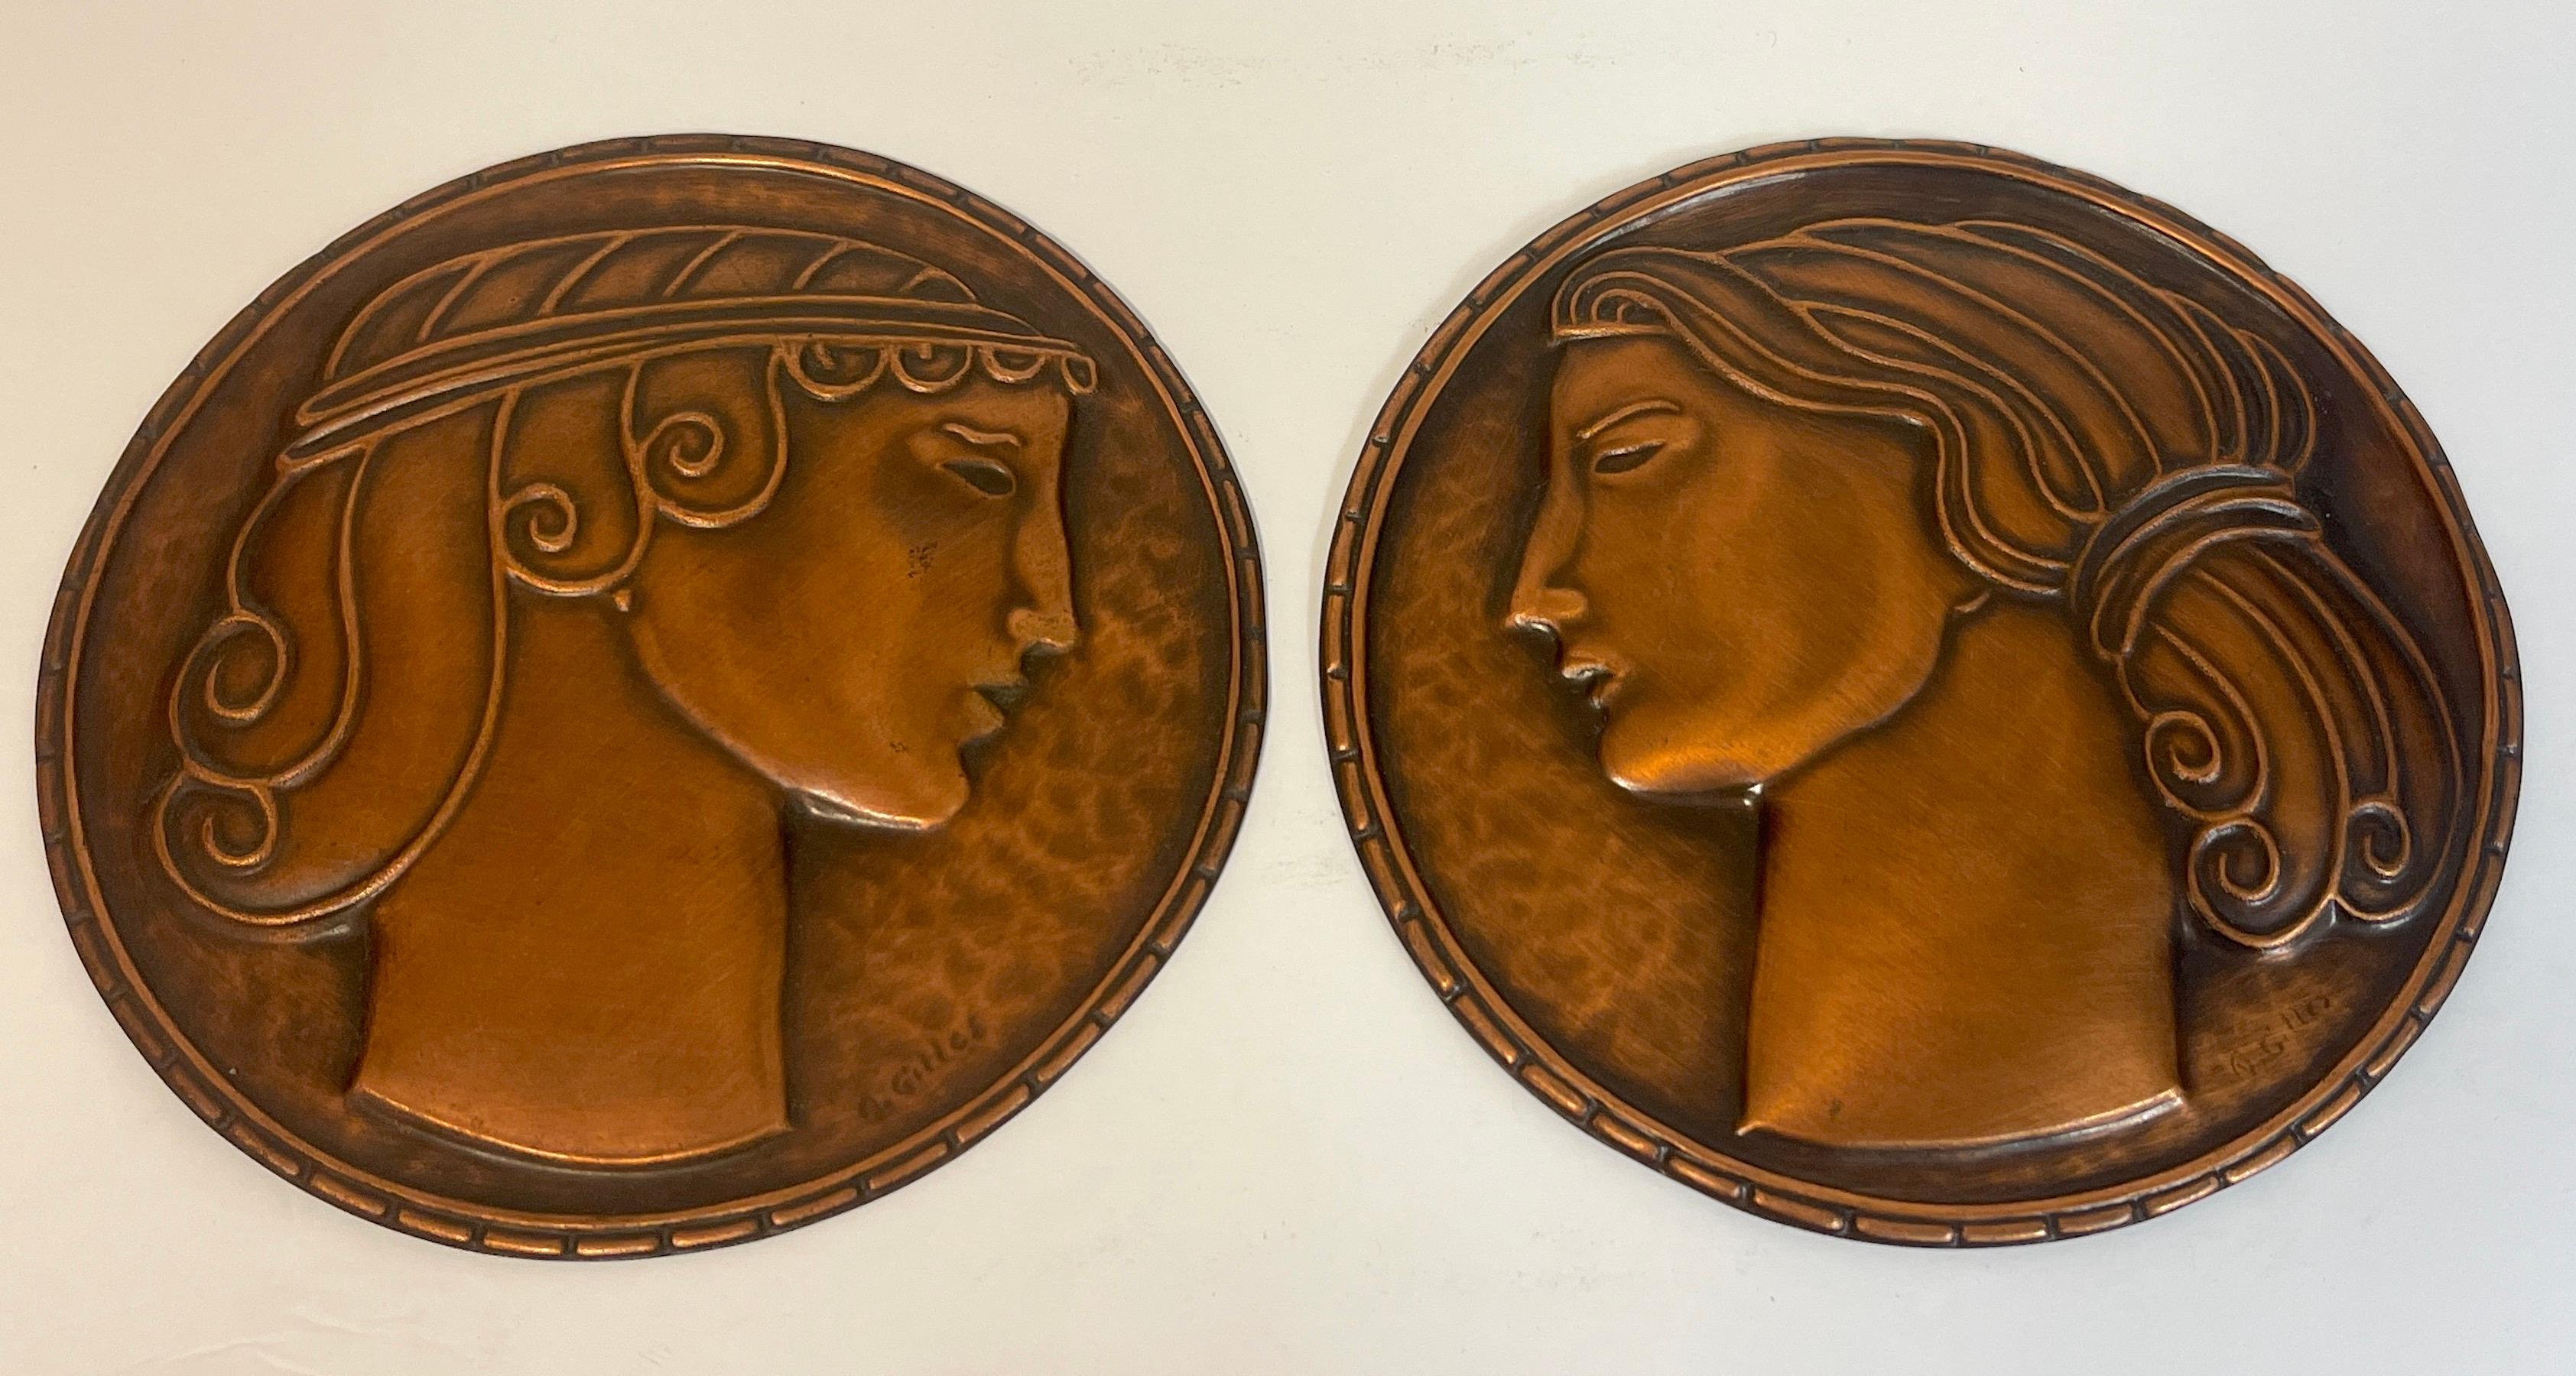 Pair of Art Deco copper portrait plaques, Signed A.Gilles
By Atelier Albert Gilles, Chateau-Richer, Quebec 
Influences of American Artist, Paul Manship 
Both signed lower right side 'A Giles'.